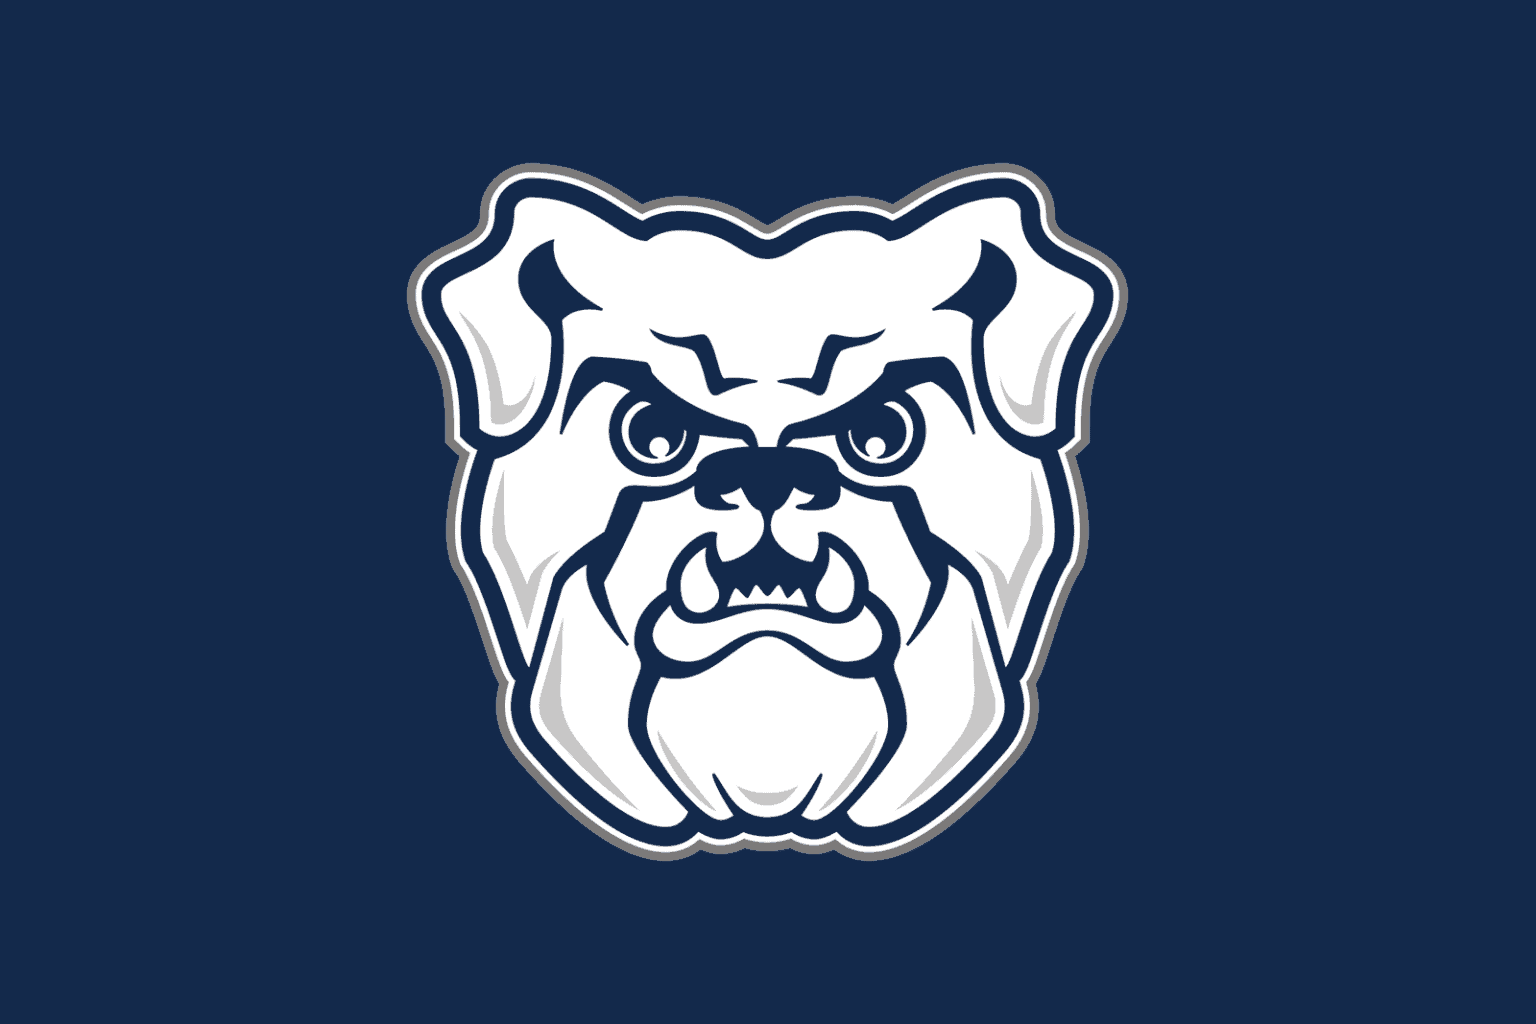 Butler completes 2023 nonconference football schedule